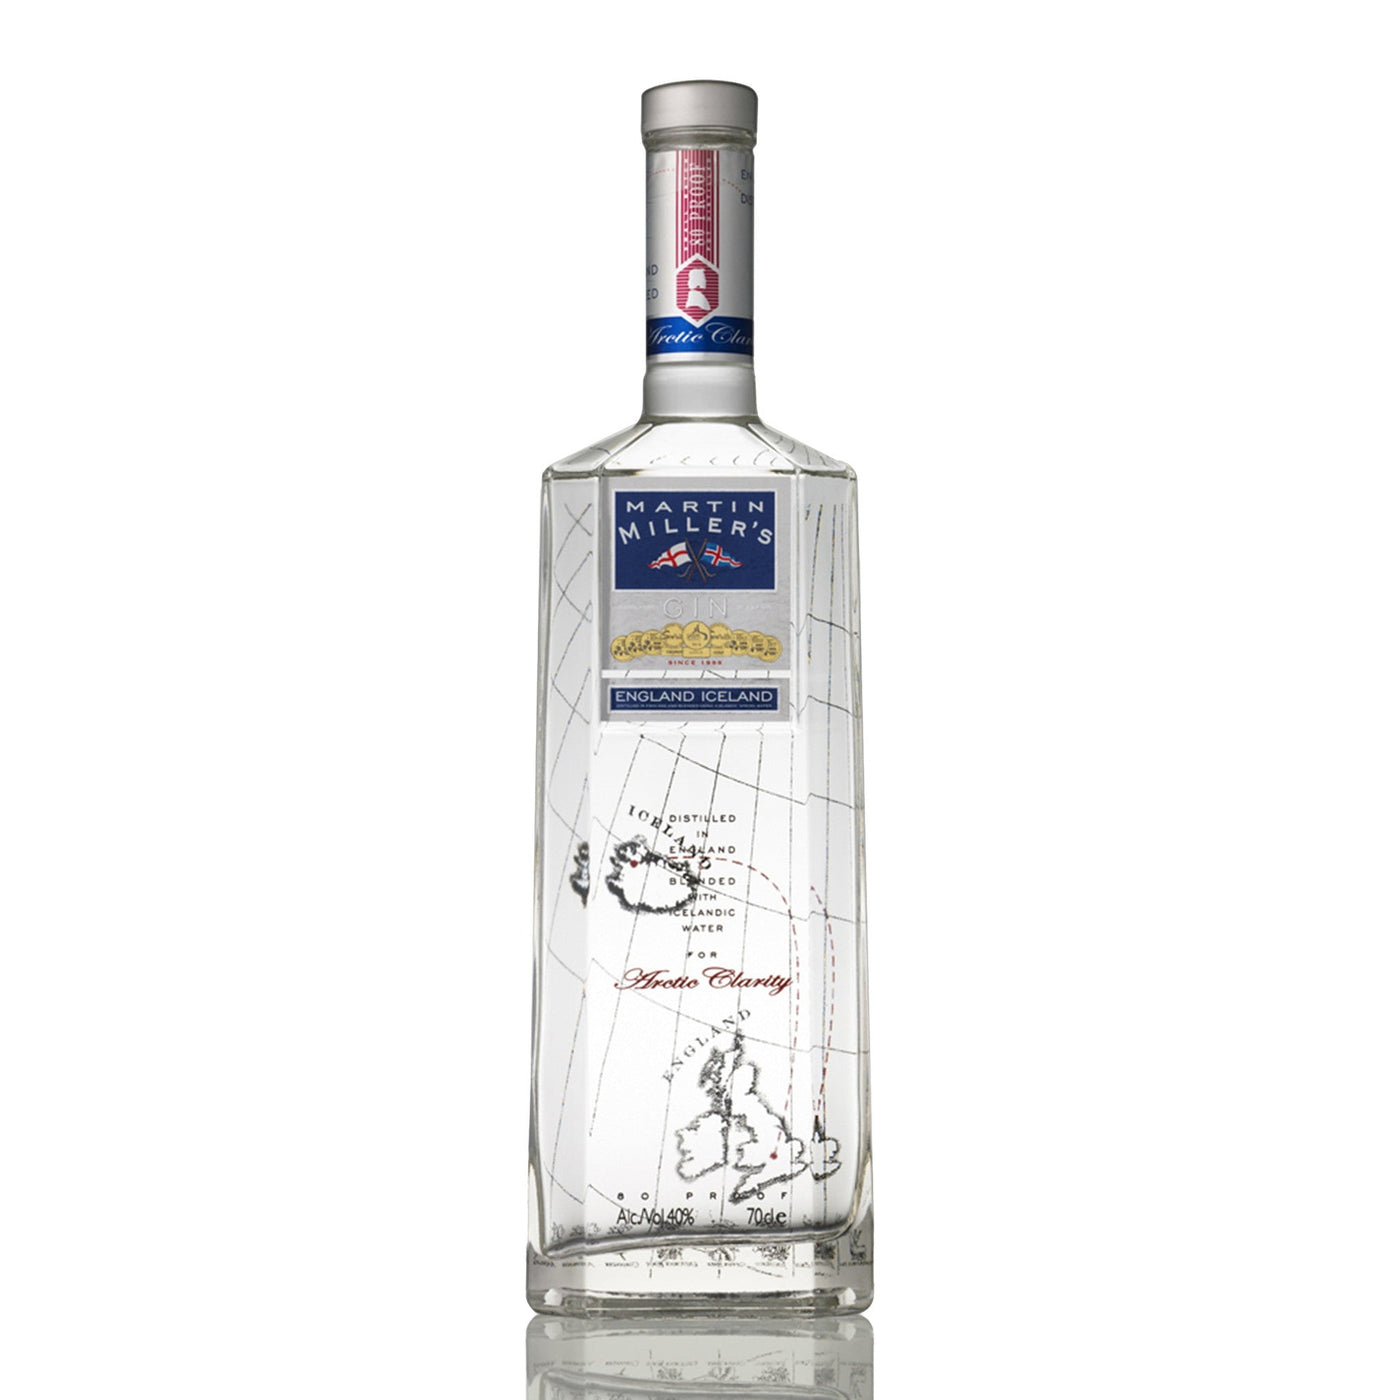 Martin Millers Reformed Gin 40% Size: 70cl